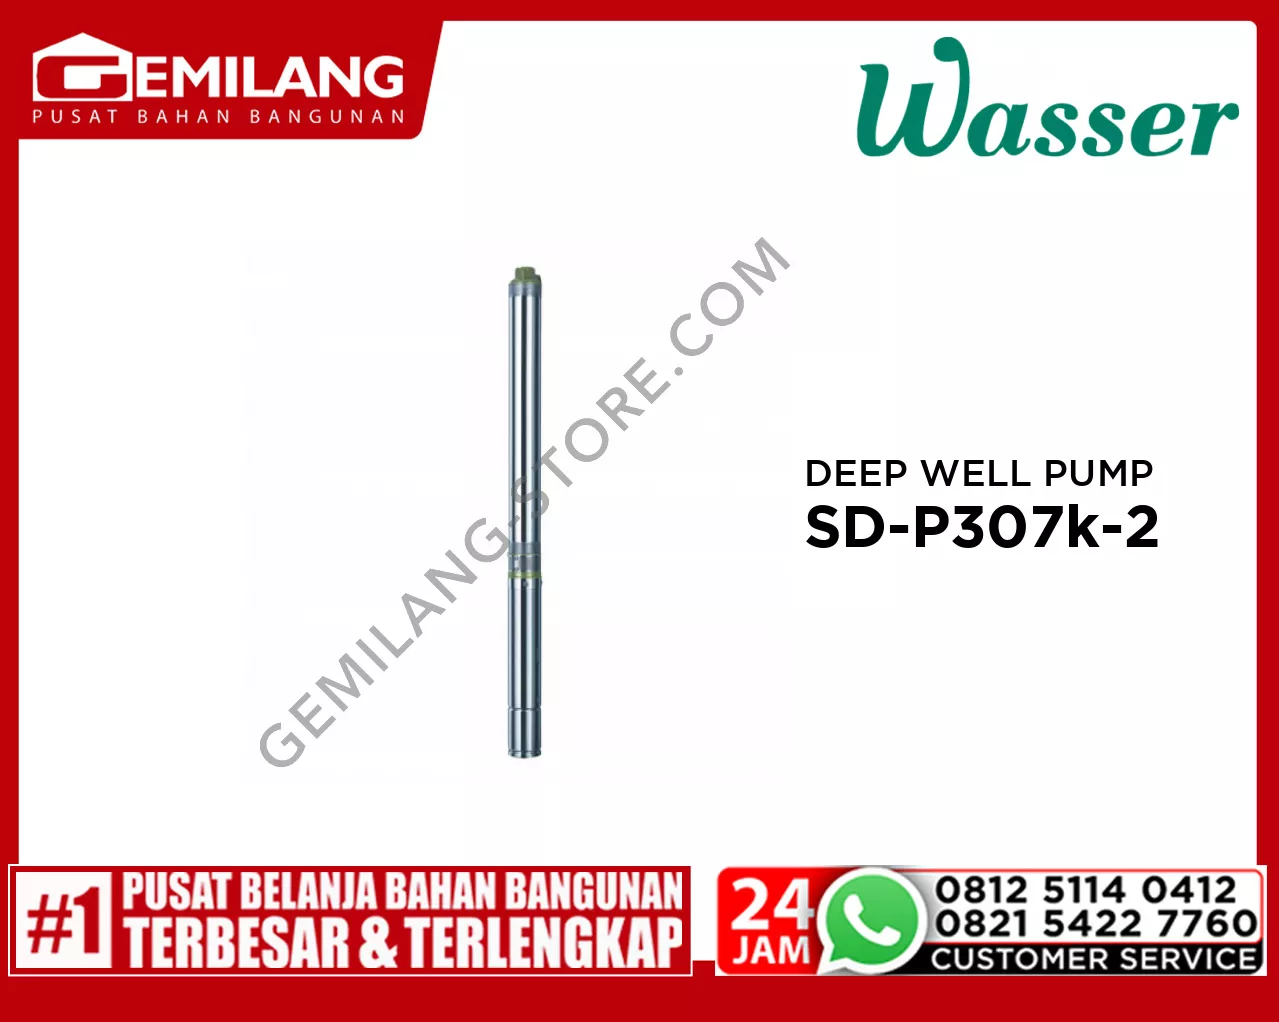 WASSER SUBMERSIBLE DEEP WELL PUMP PPO SINGLE PHASE SD-P307k-2